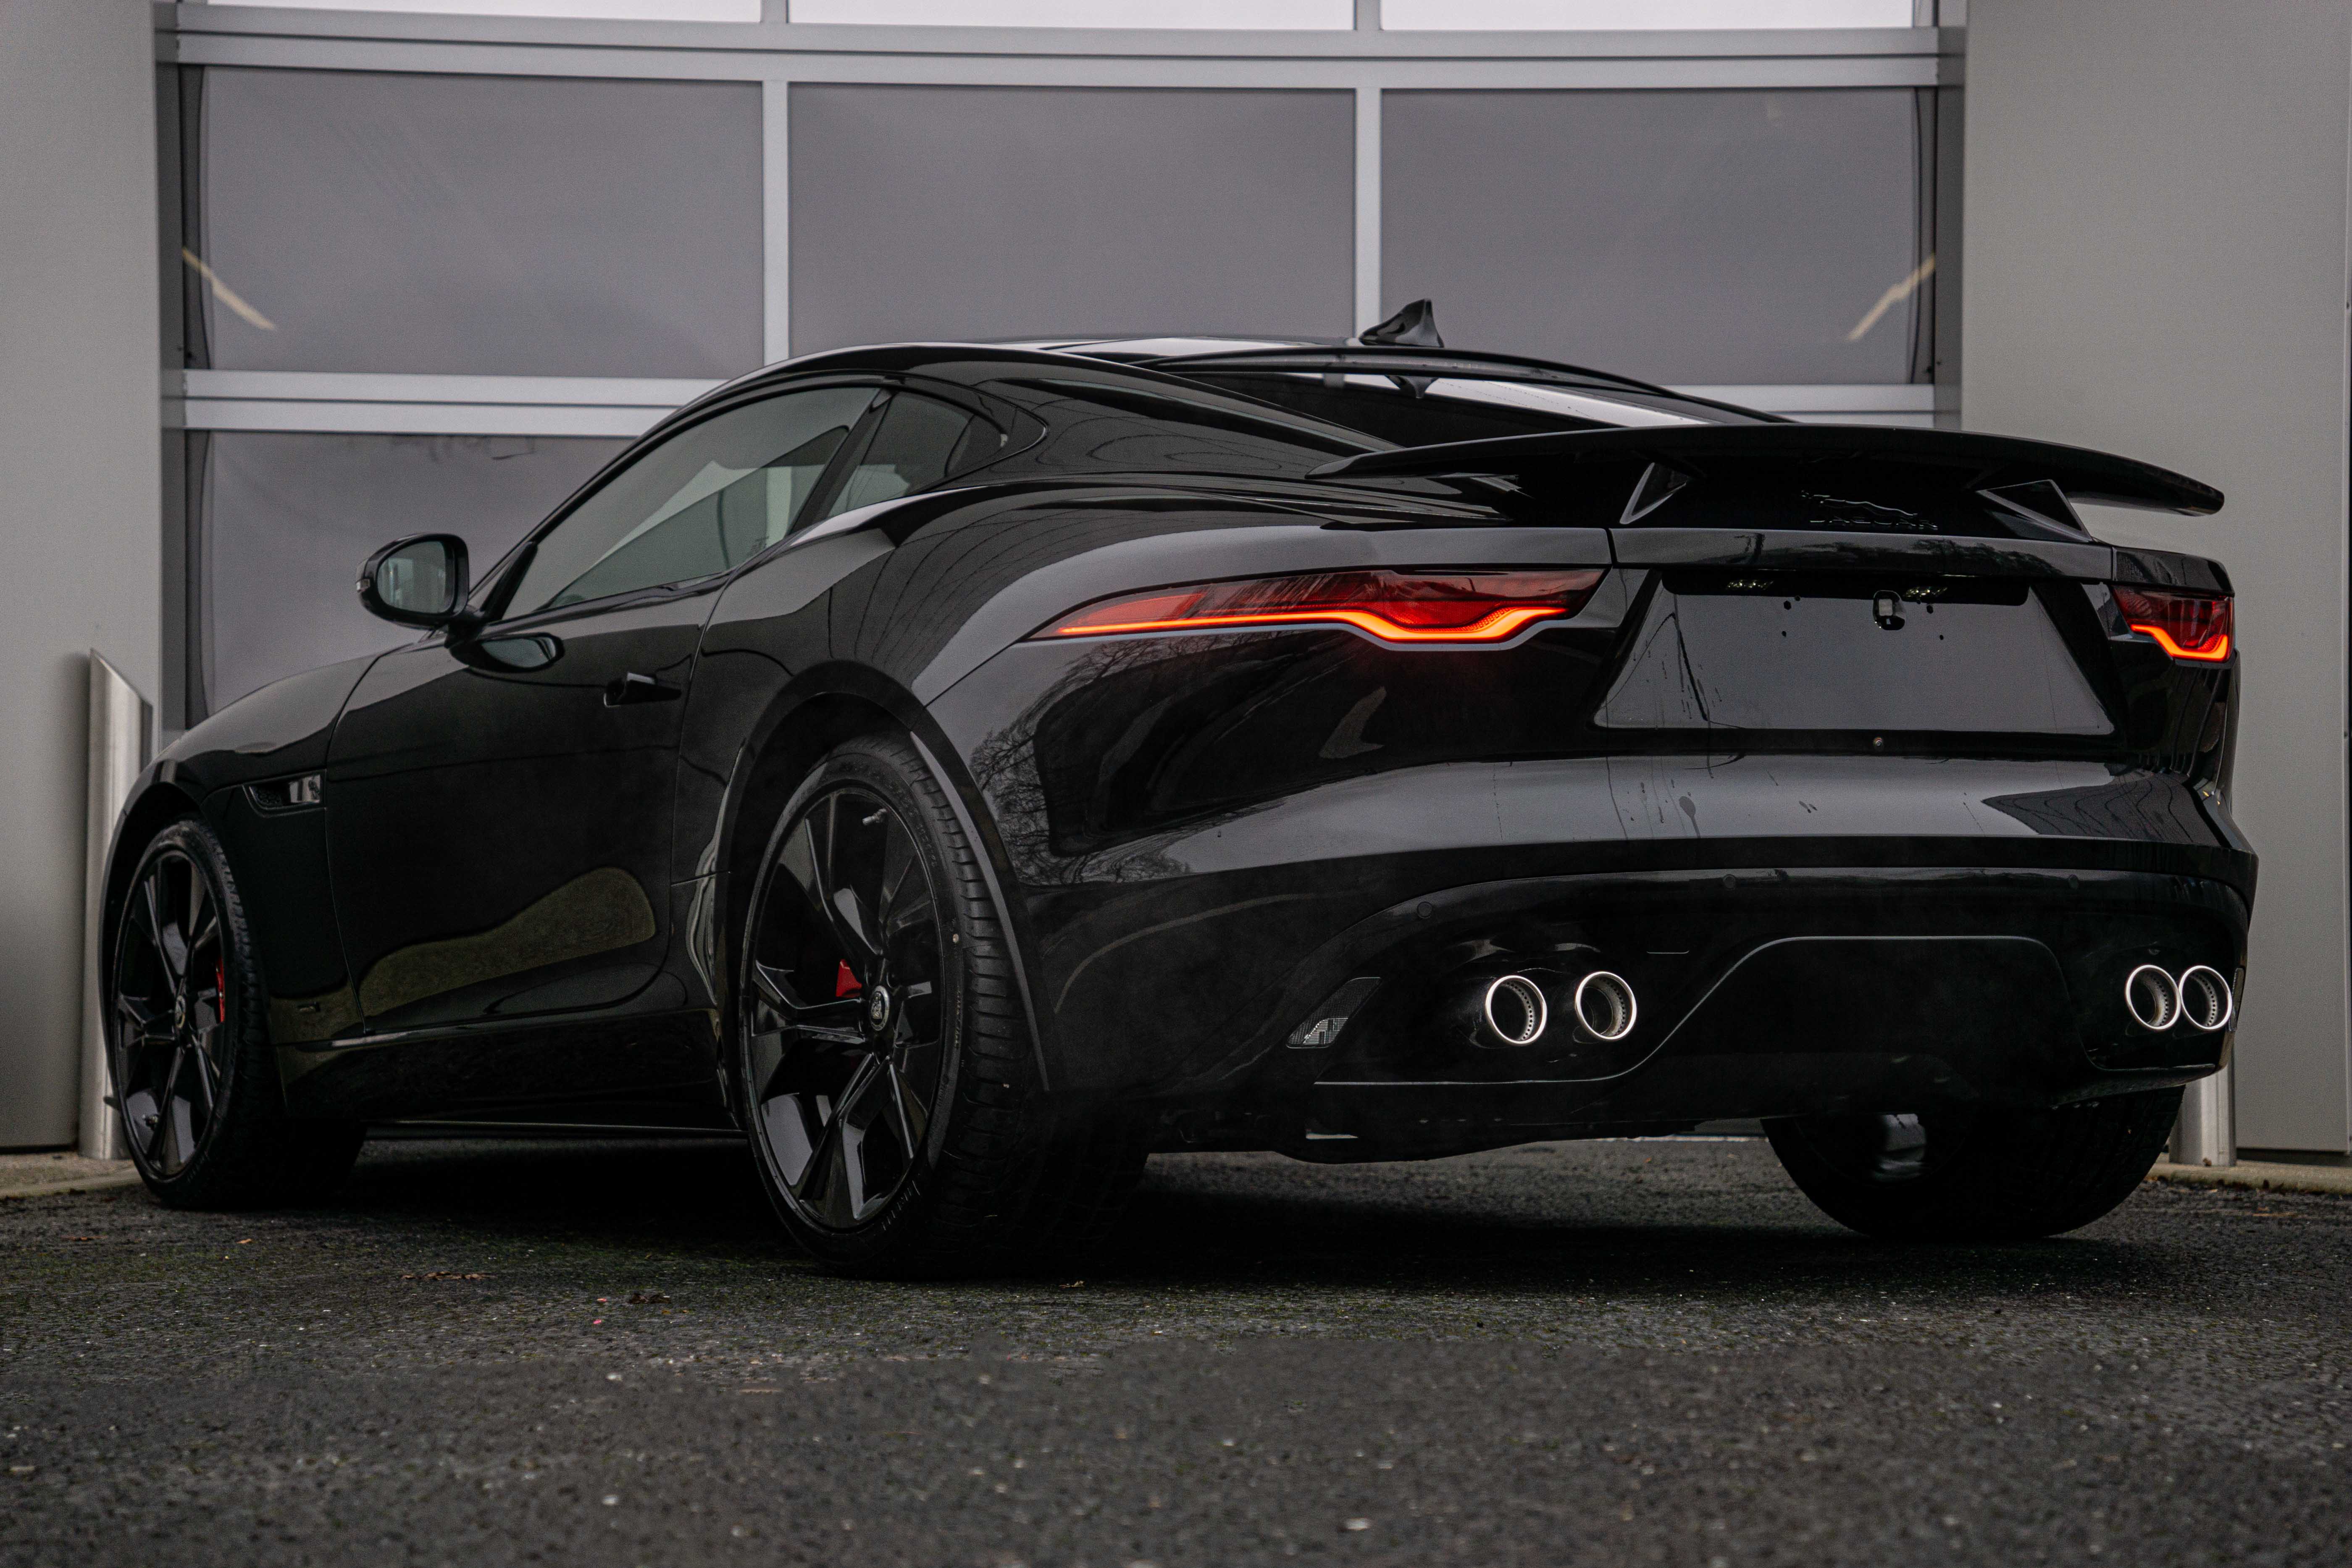 F-TYPE 5.0 P450 SUPERCHARGED V8 75 PLUS 2DR AUTO COUPE